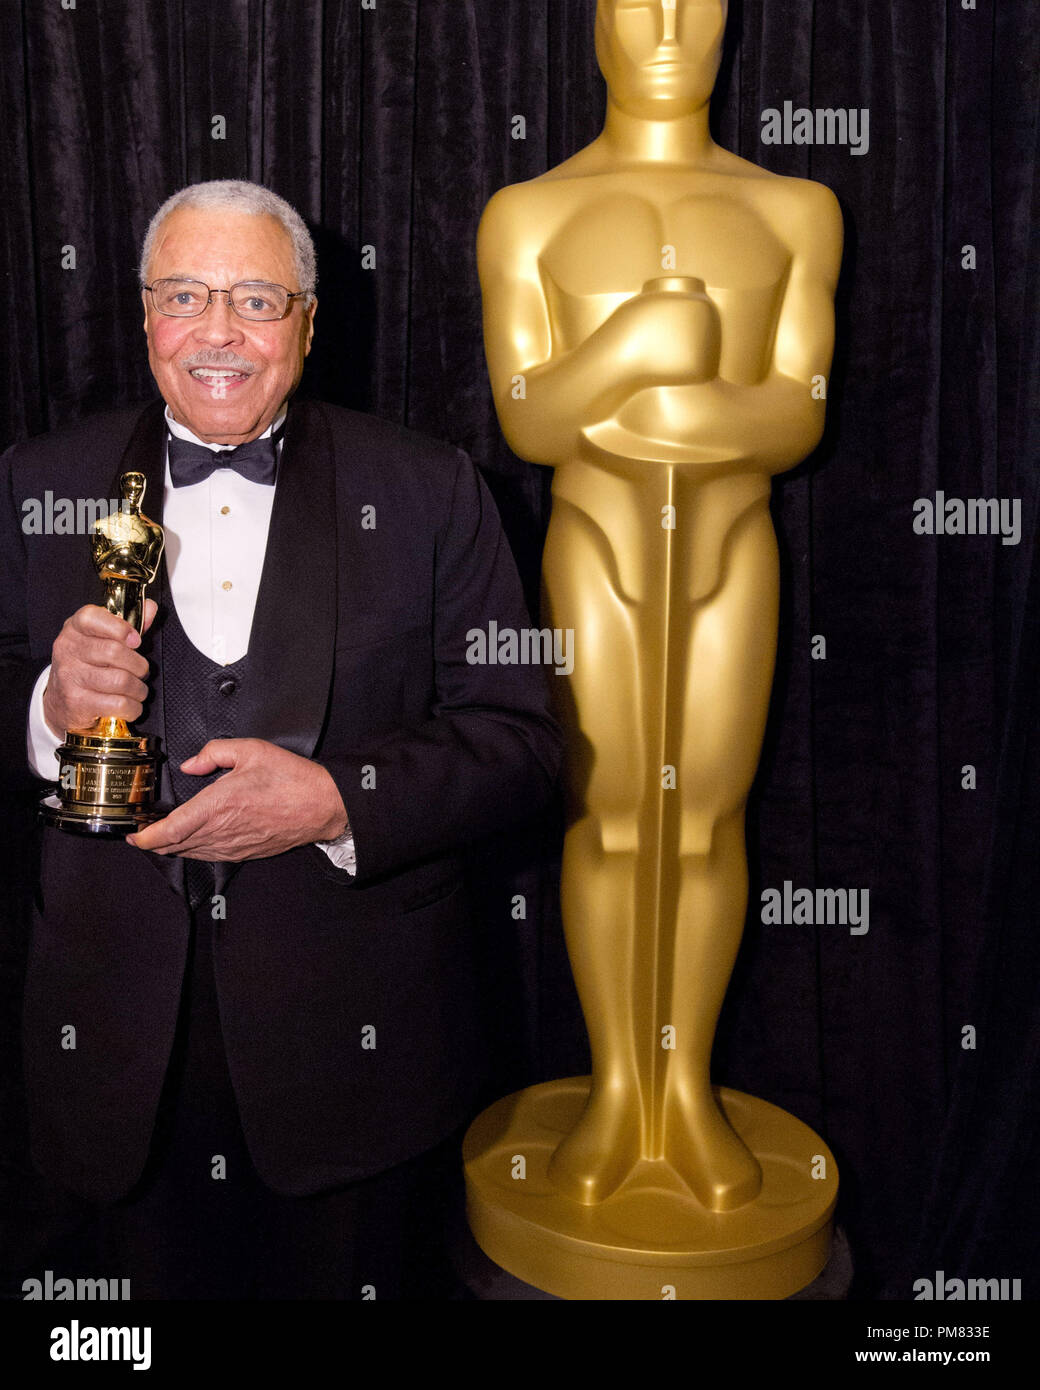 Honorary Award Recipient James Earl Jones backstage during the live ABC Television Network broadcast of the 84th Annual Academy Awards from the Hollywood and Highland Center, in Hollywood, CA, Sunday, February 26, 2012. Stock Photo